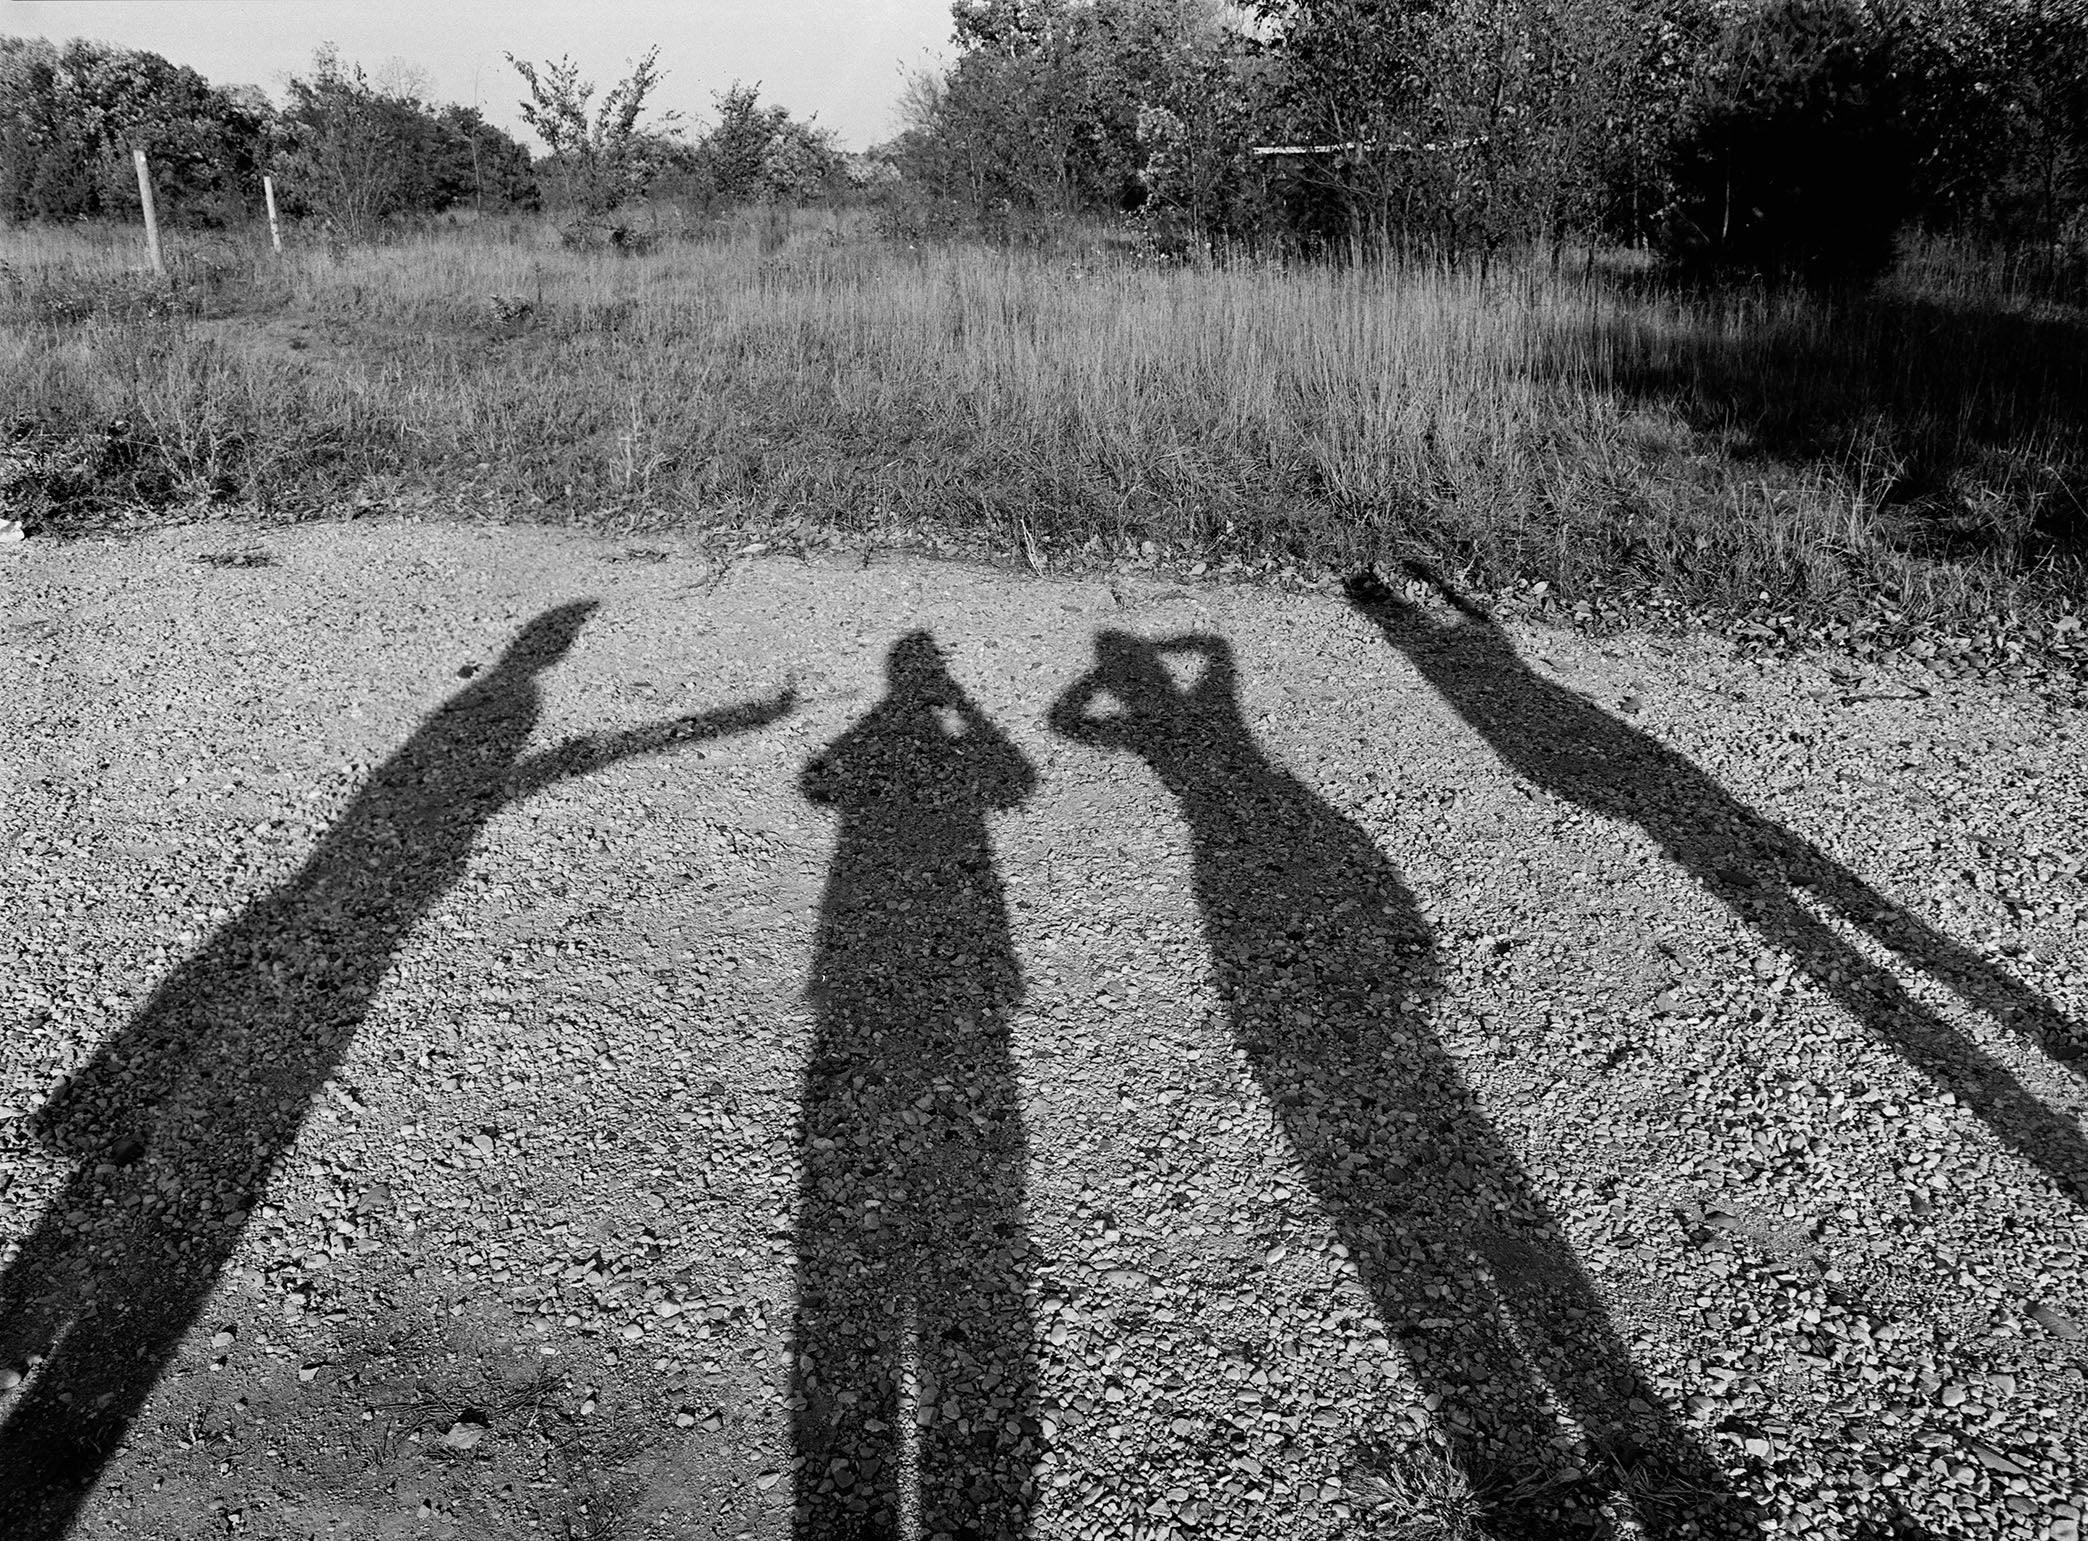 Photography by Michael Northrup titled "Shadow Games".